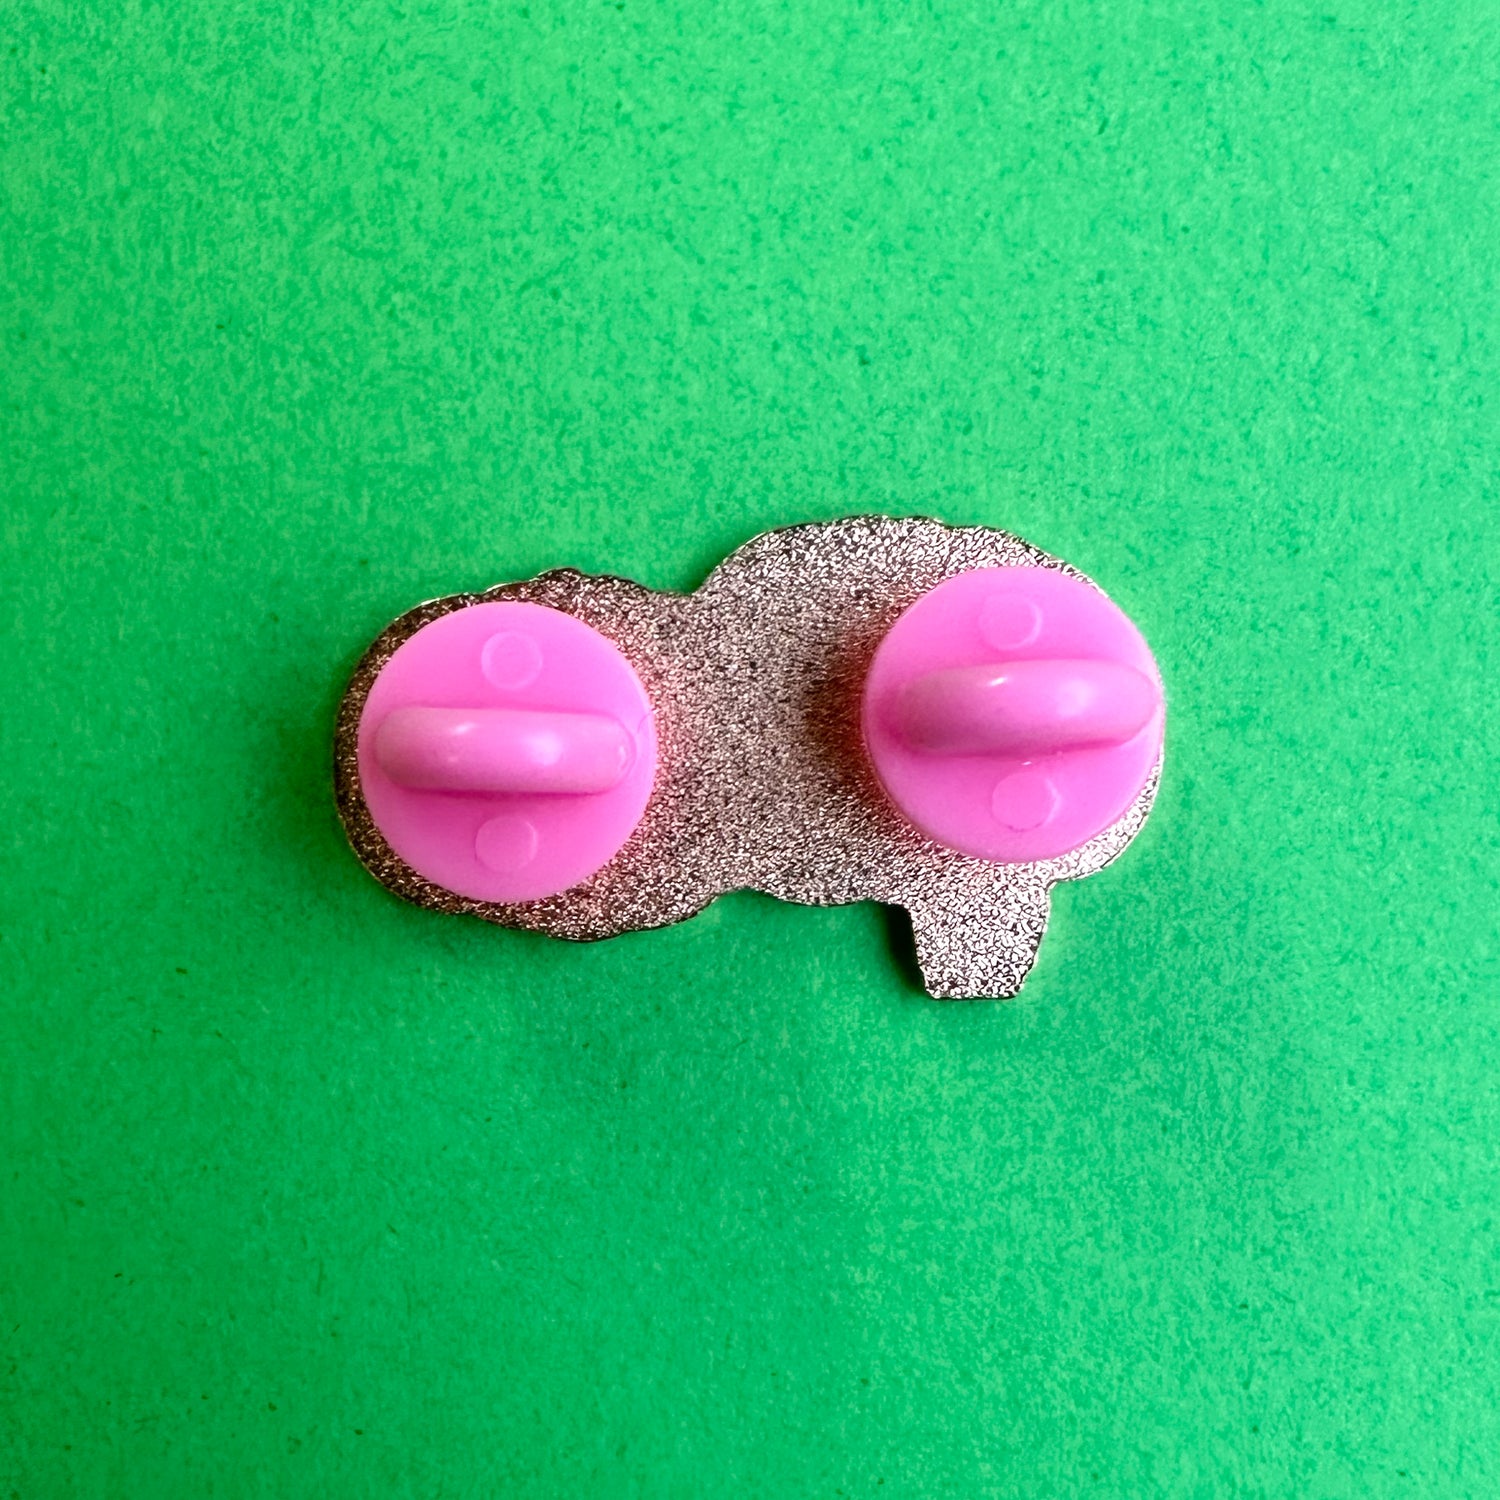 The back of an enamel pin with two pink rubber pin backs on a green paper background